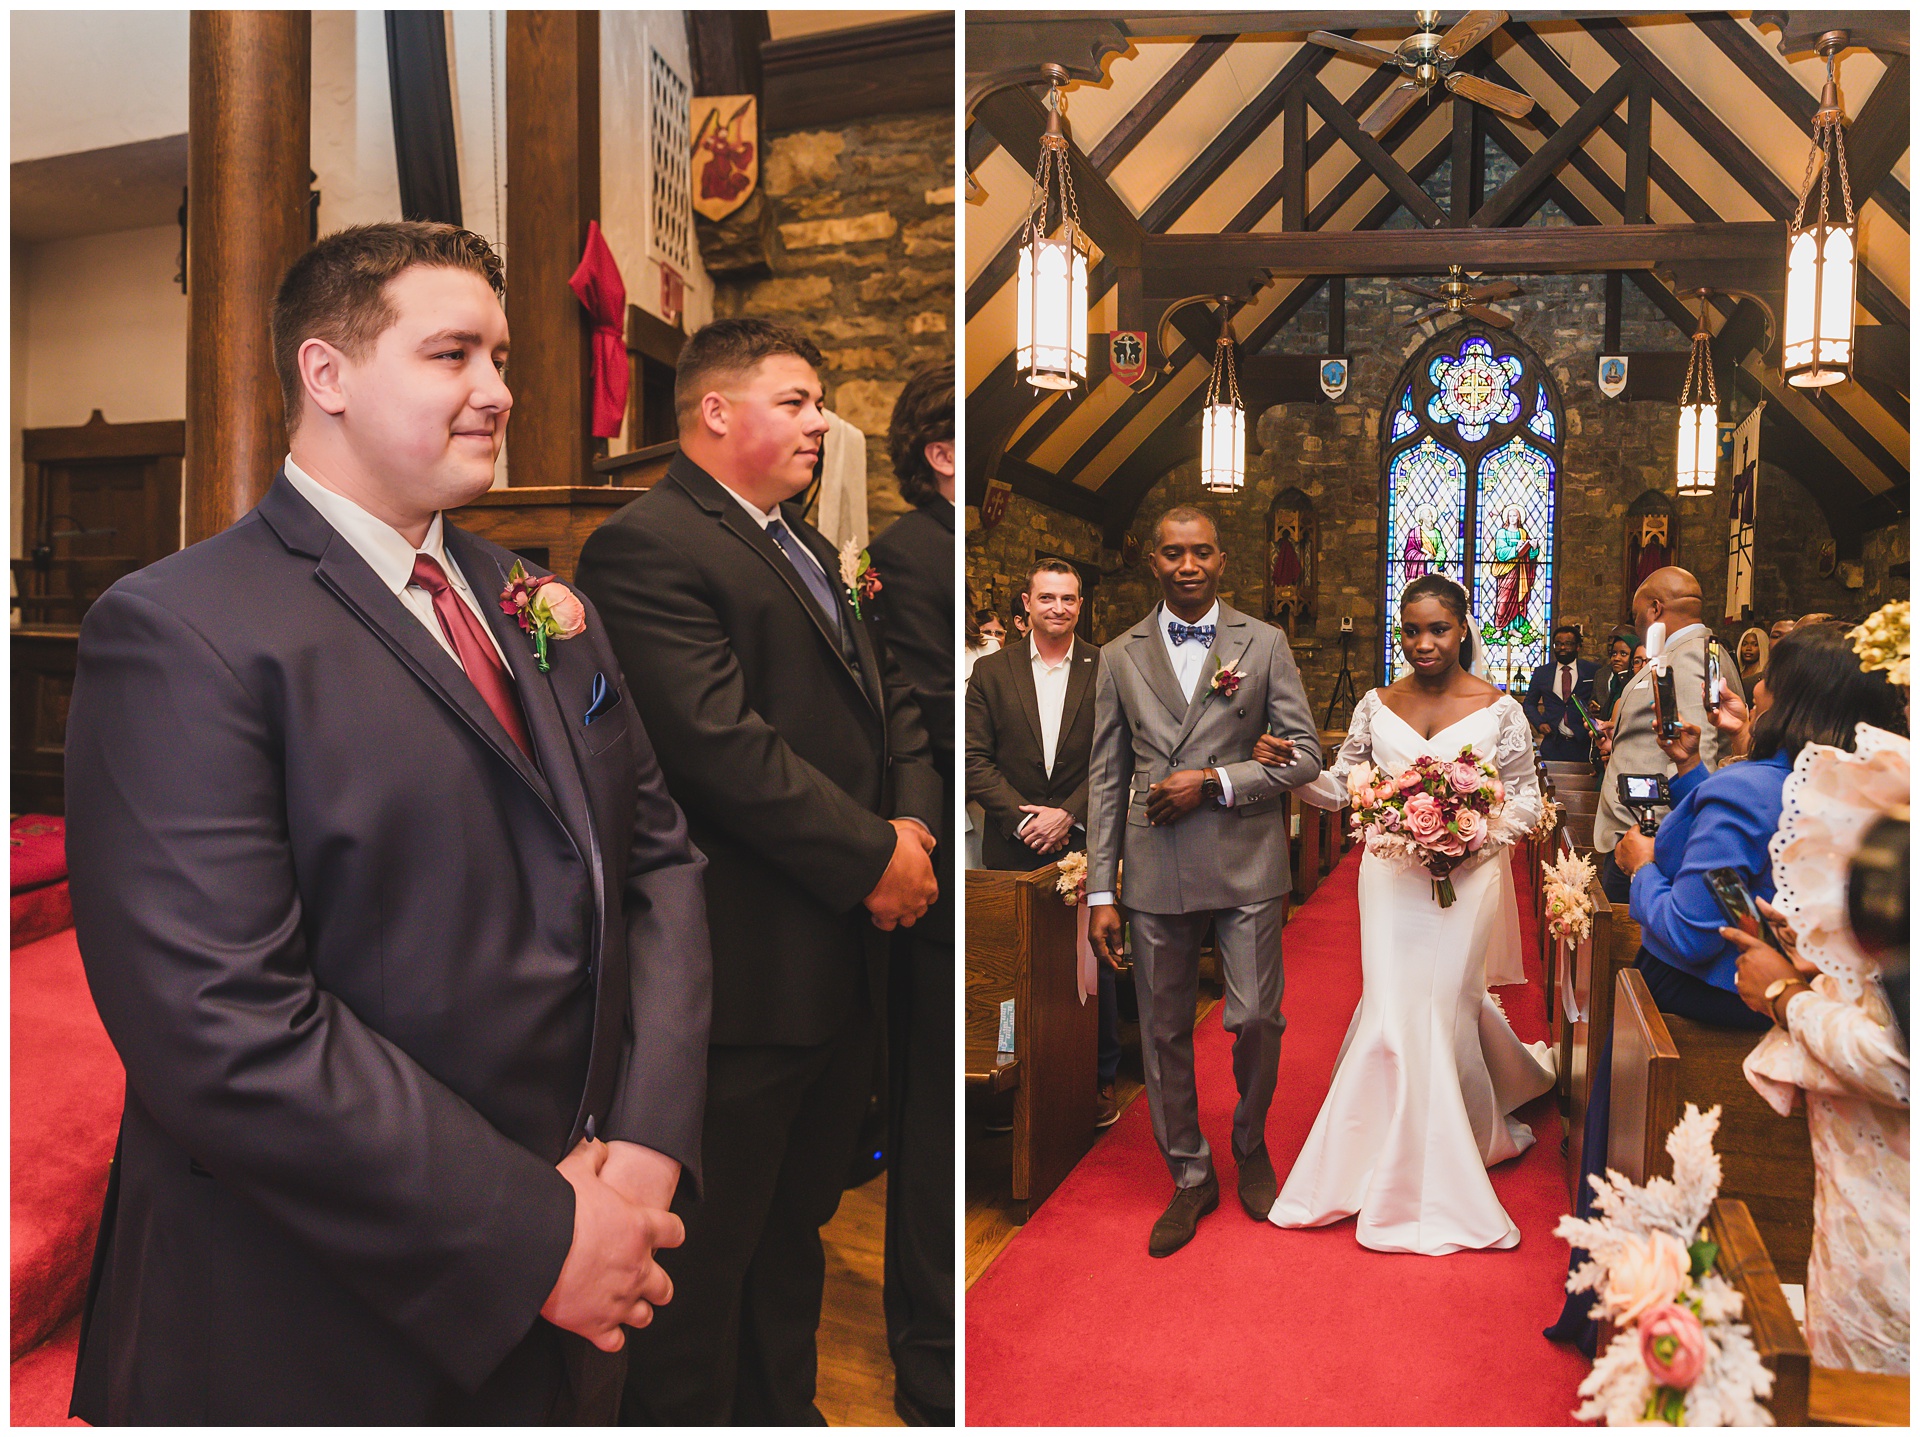 Wedding photography at St. Luke's Episcopal Church in Excelsior Springs, Missouri, by Kansas City wedding photographers Wisdom-Watson Weddings.